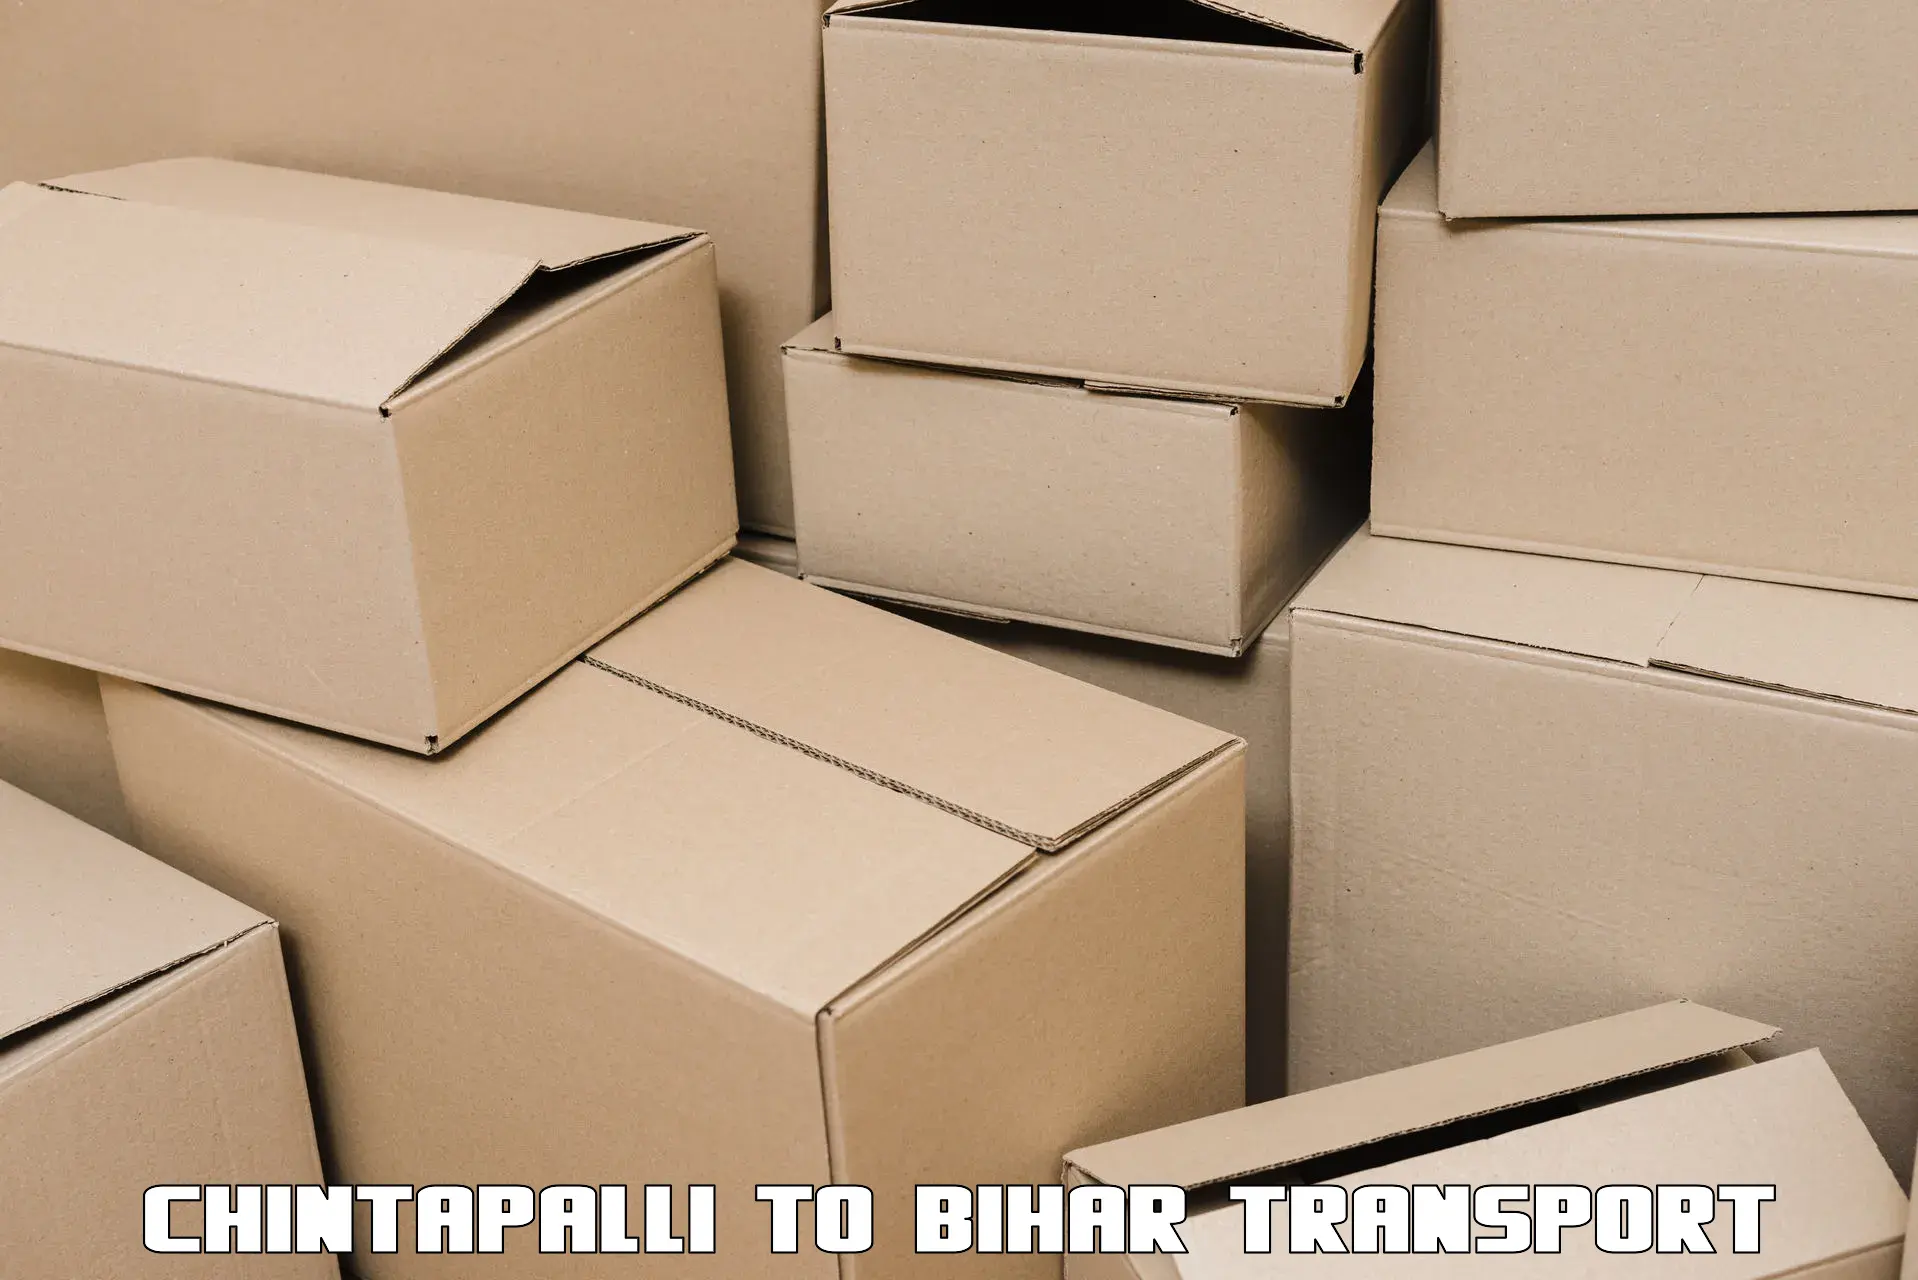 Air freight transport services Chintapalli to Bihar